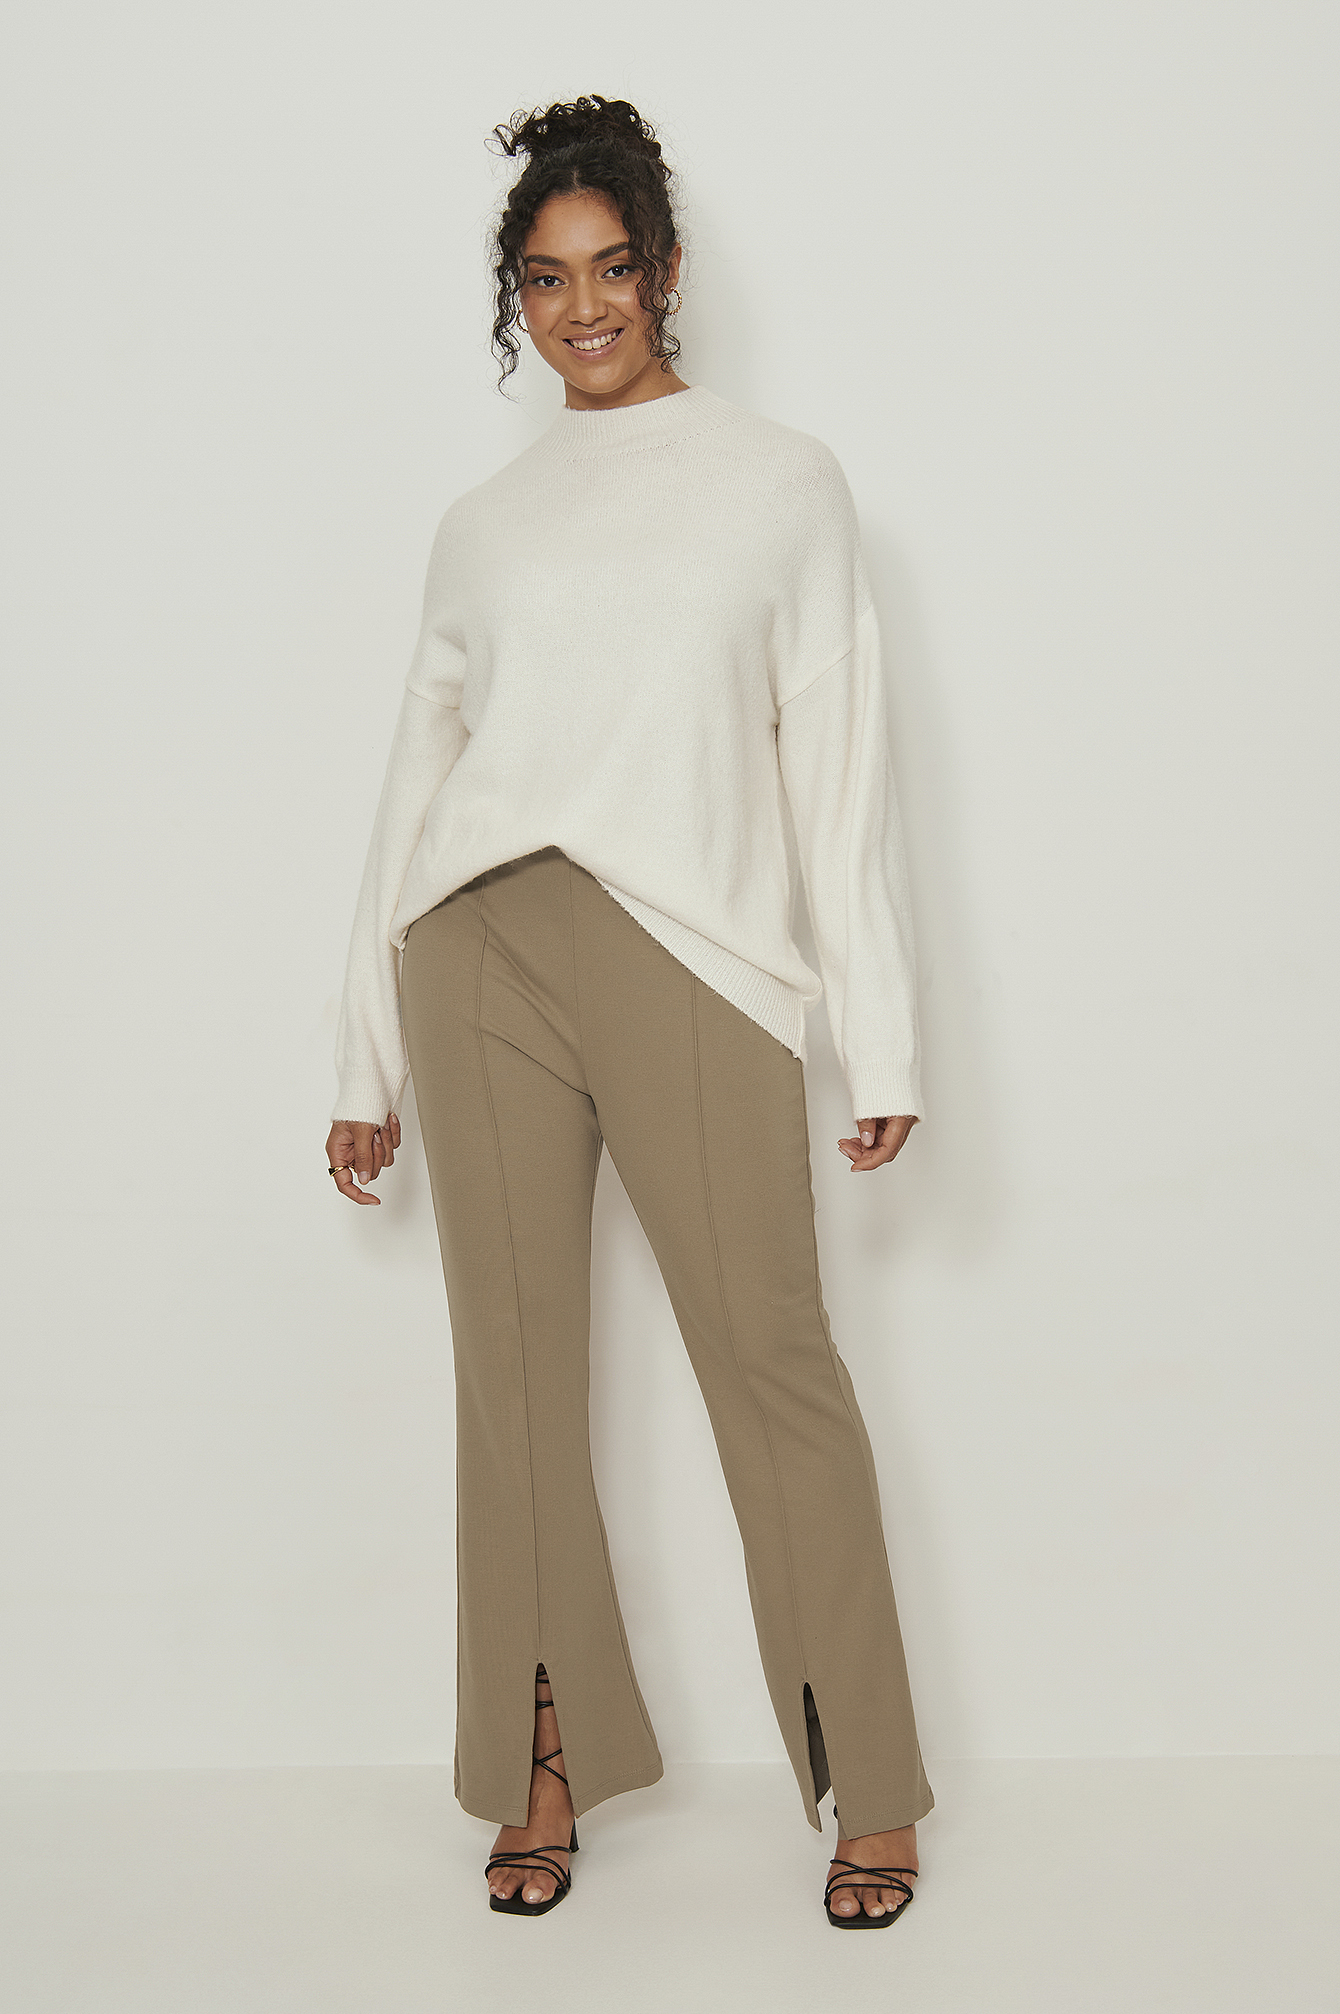 Slit Detail Jersey Pants Outfit.